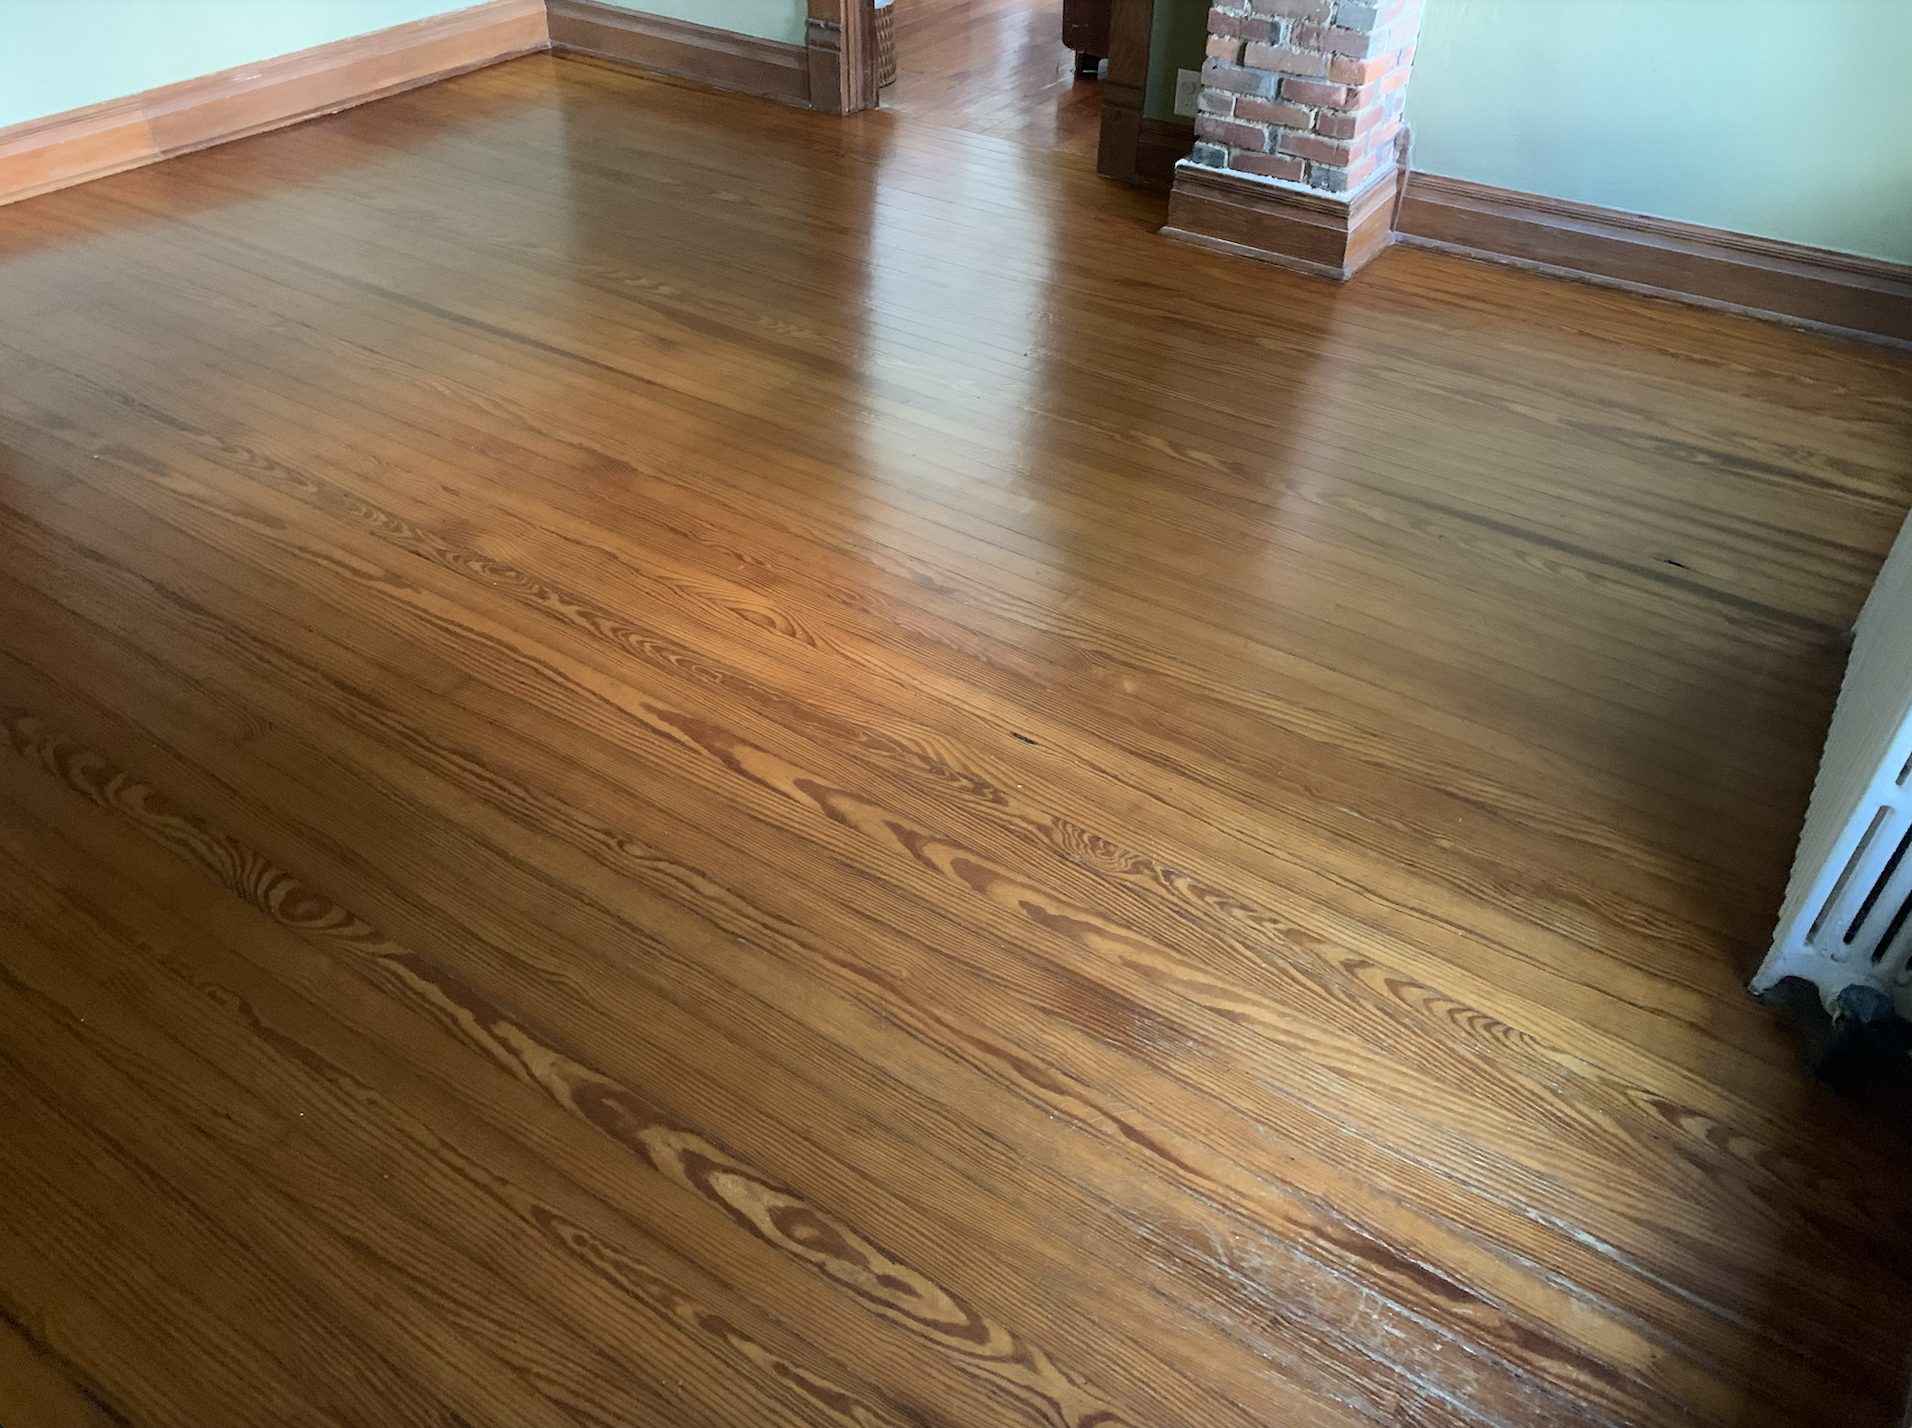 Screen and Recoating hardwood flooring by classic touch floor care in Wheeling Illinois